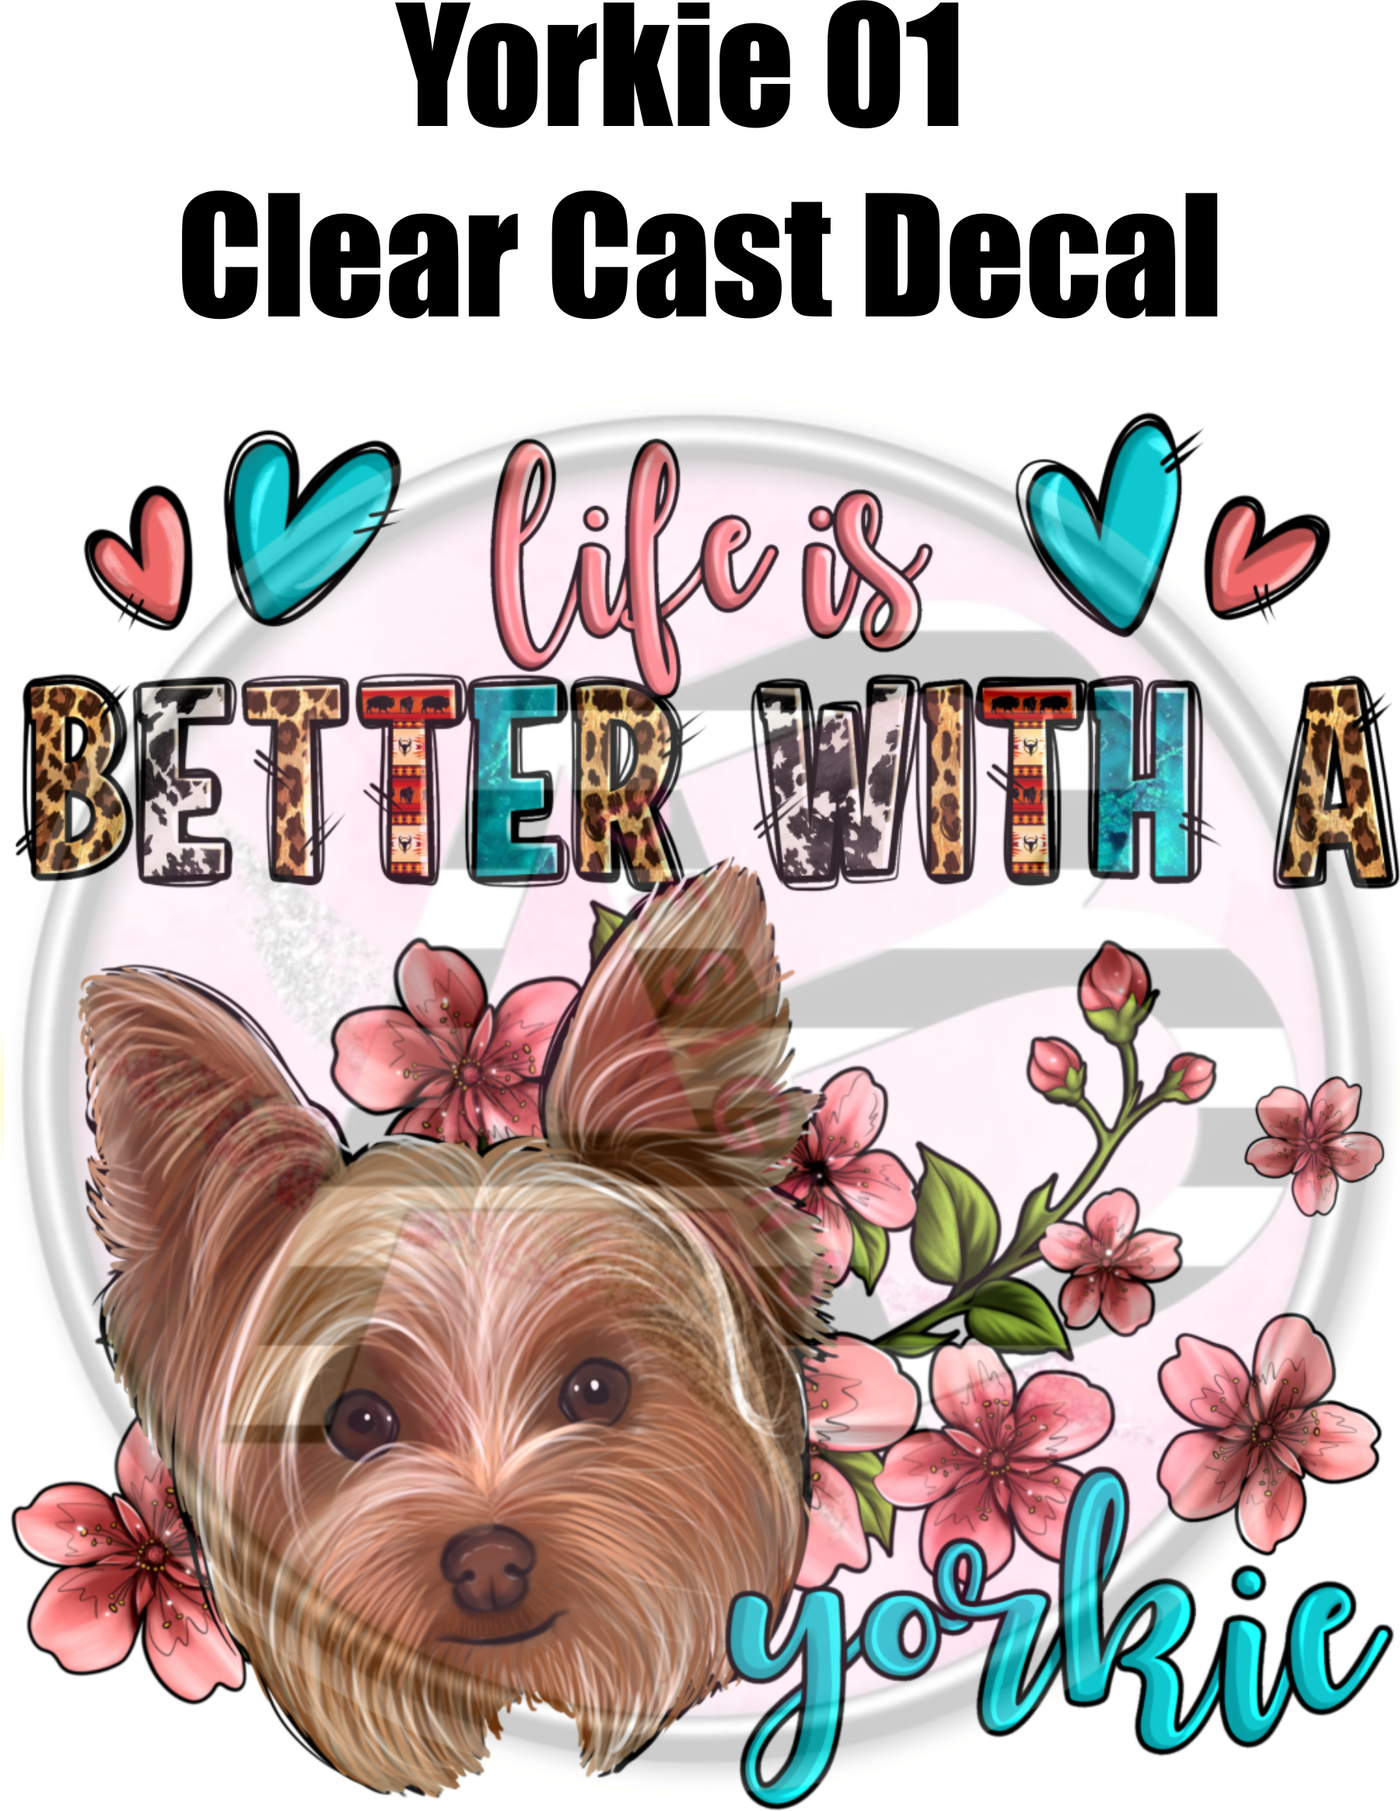 Yorkie 01 - Clear Cast Decal